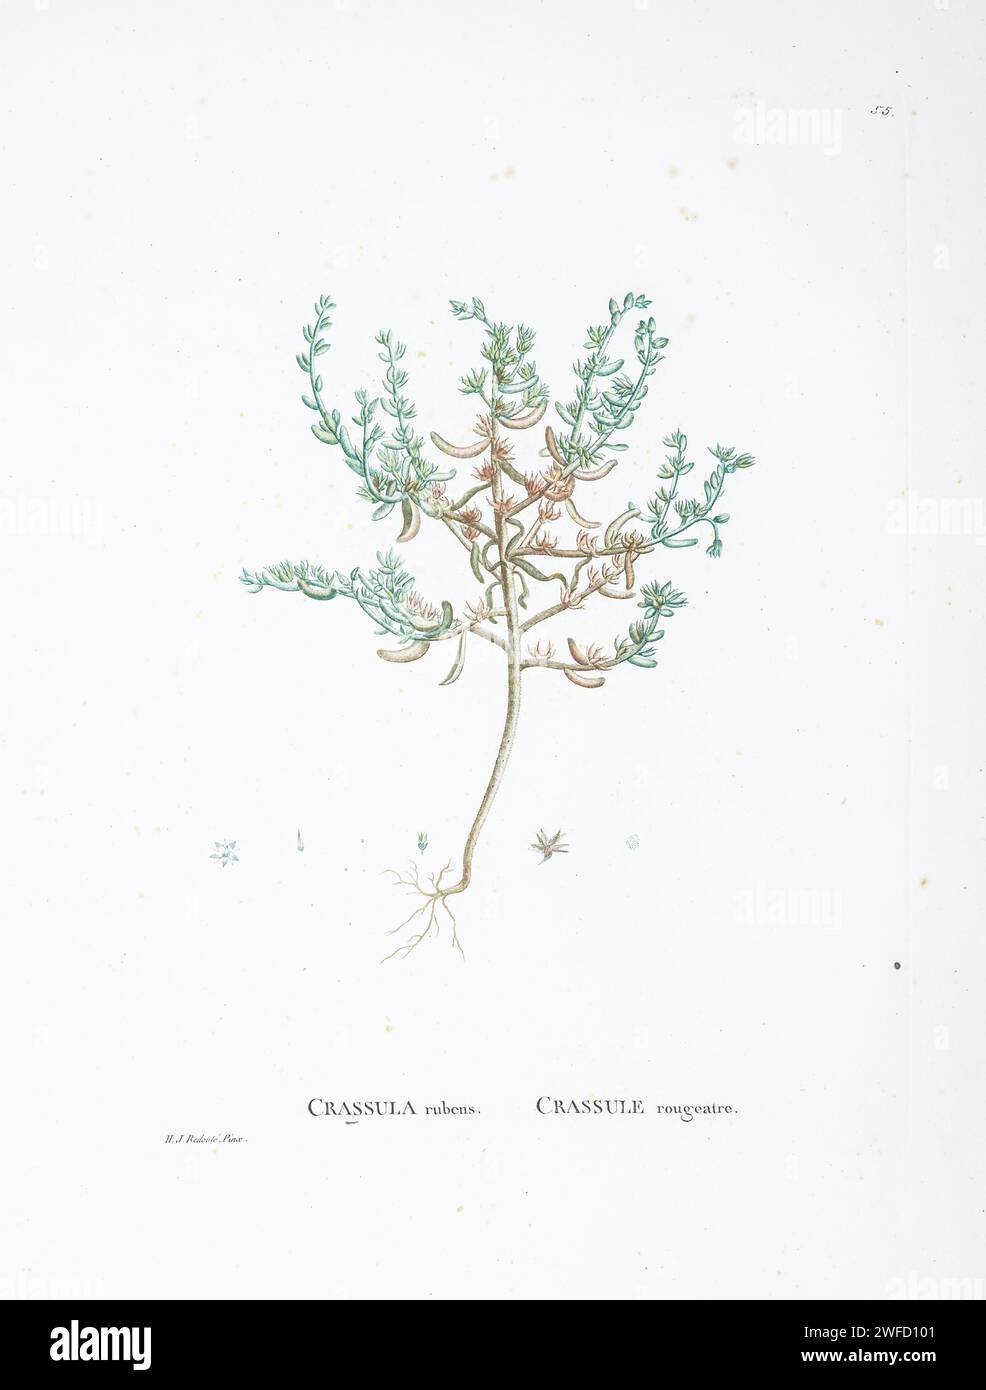 Sedum rubens L. Here As Crassula rubens from History of Succulent Plants [Plantarum historia succulentarum / Histoire des plantes grasses] painted by Pierre-Joseph Redouté and described by Augustin Pyramus de Candolle 1799 Sedum is a large genus of flowering plants in the family Crassulaceae, members of which are commonly known as stonecrops. Stock Photo